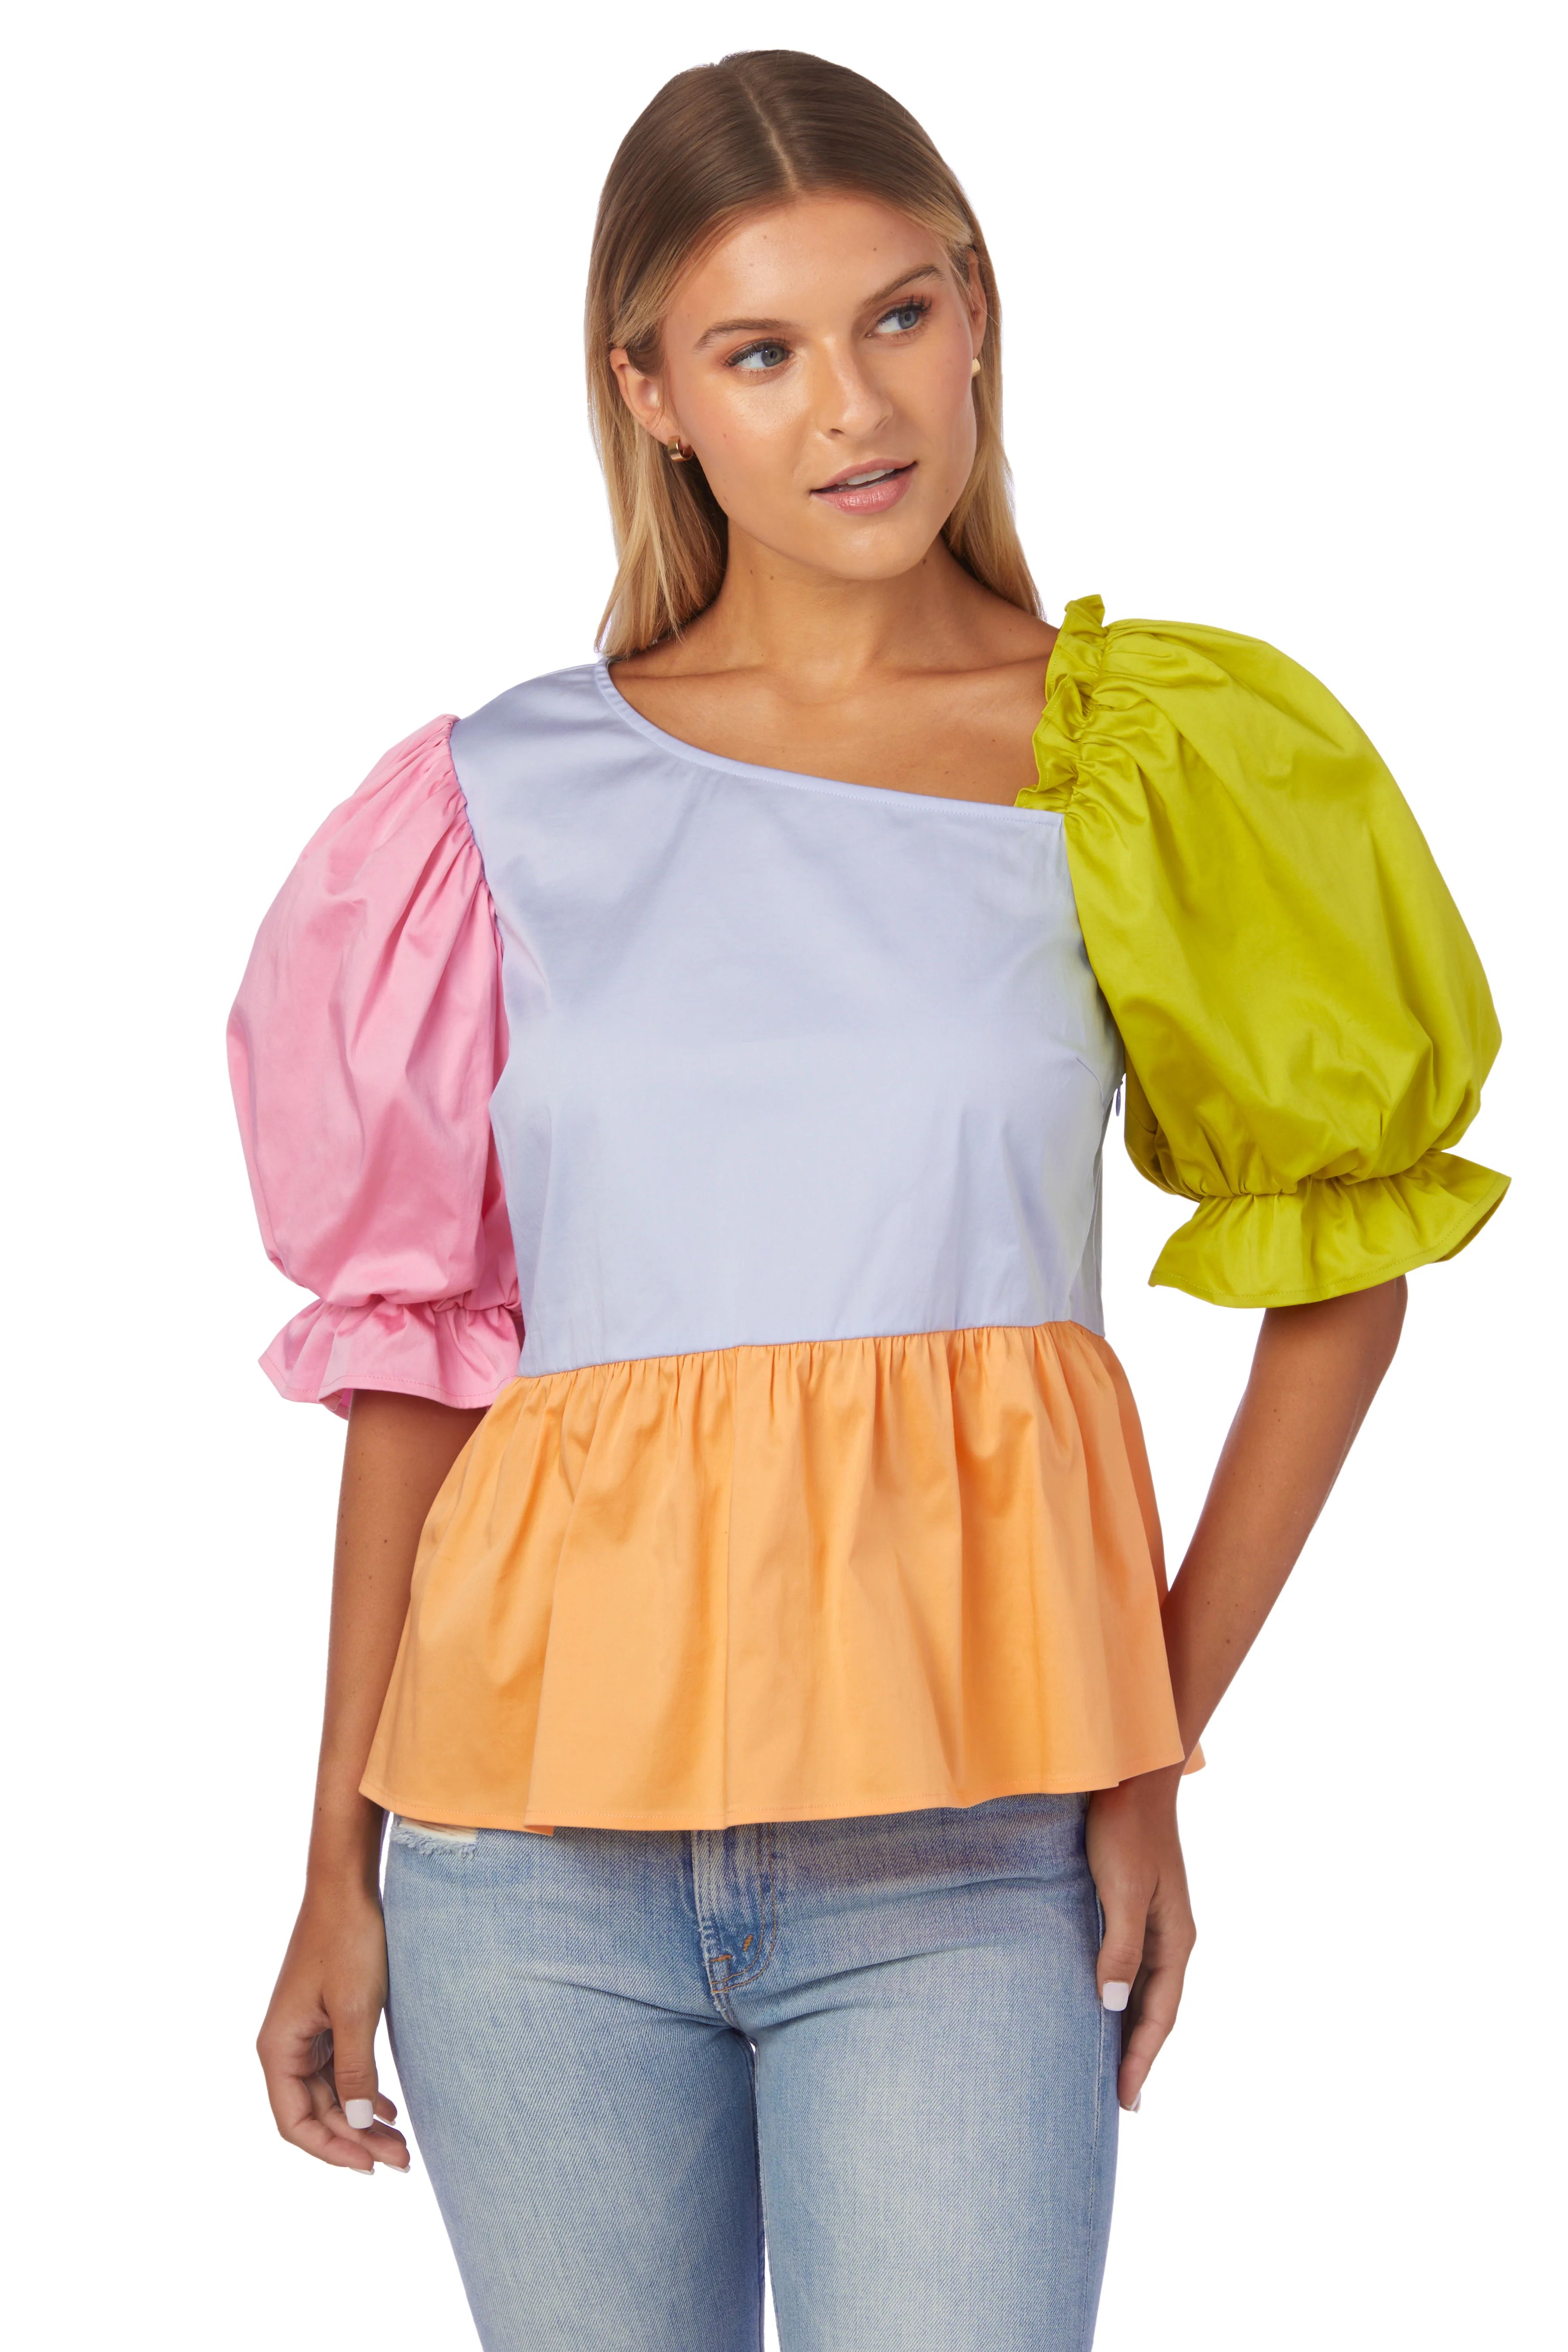 Rooney Top in Spring Colorblock - CROSBY by Mollie Burch | CROSBY by Mollie Burch